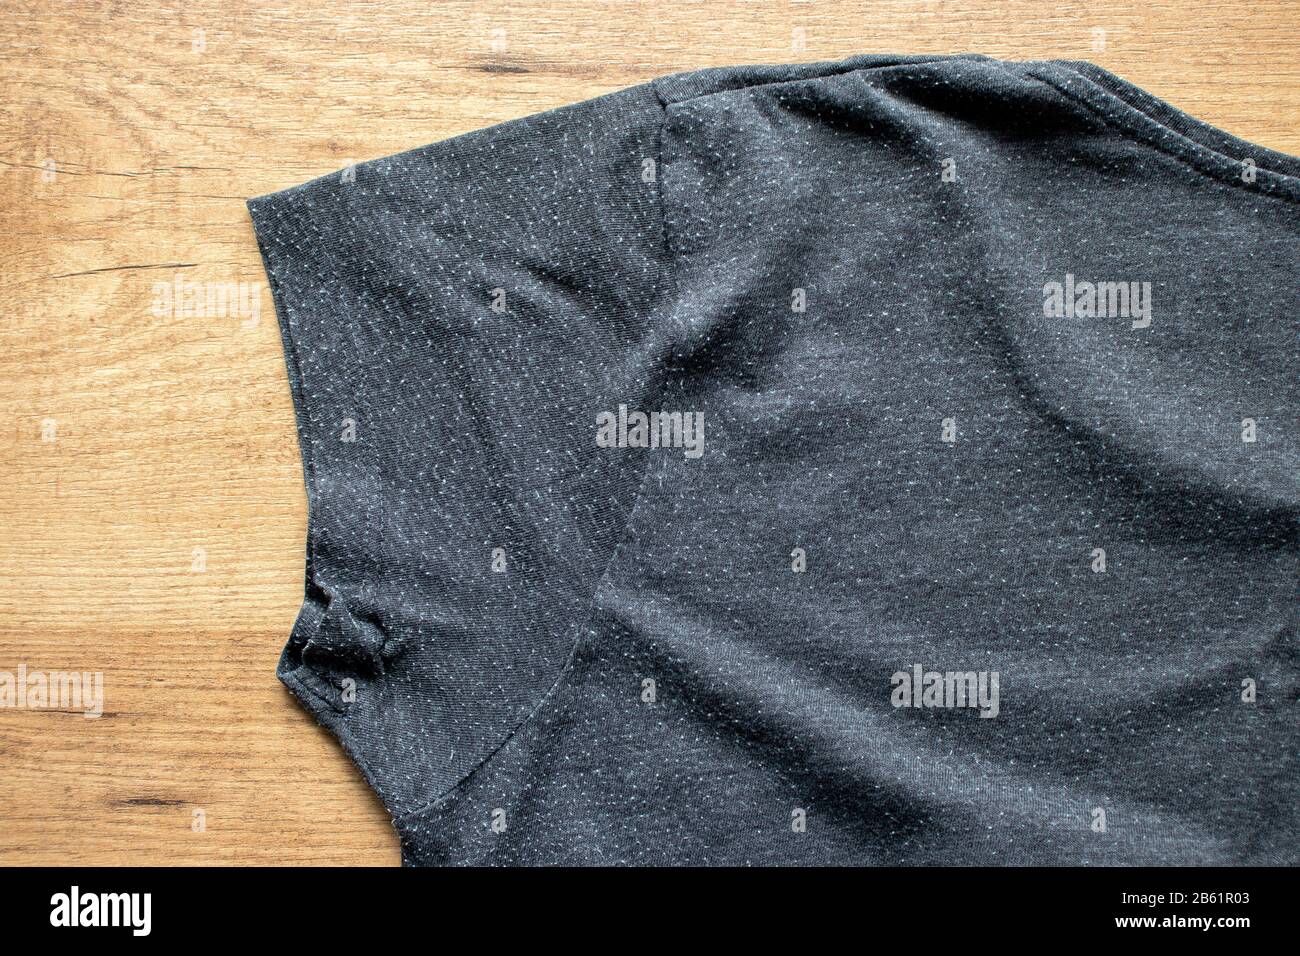 Pills on the gray tee-shirt cotton knit fabric. Bobbles on the knitwear. Stock Photo